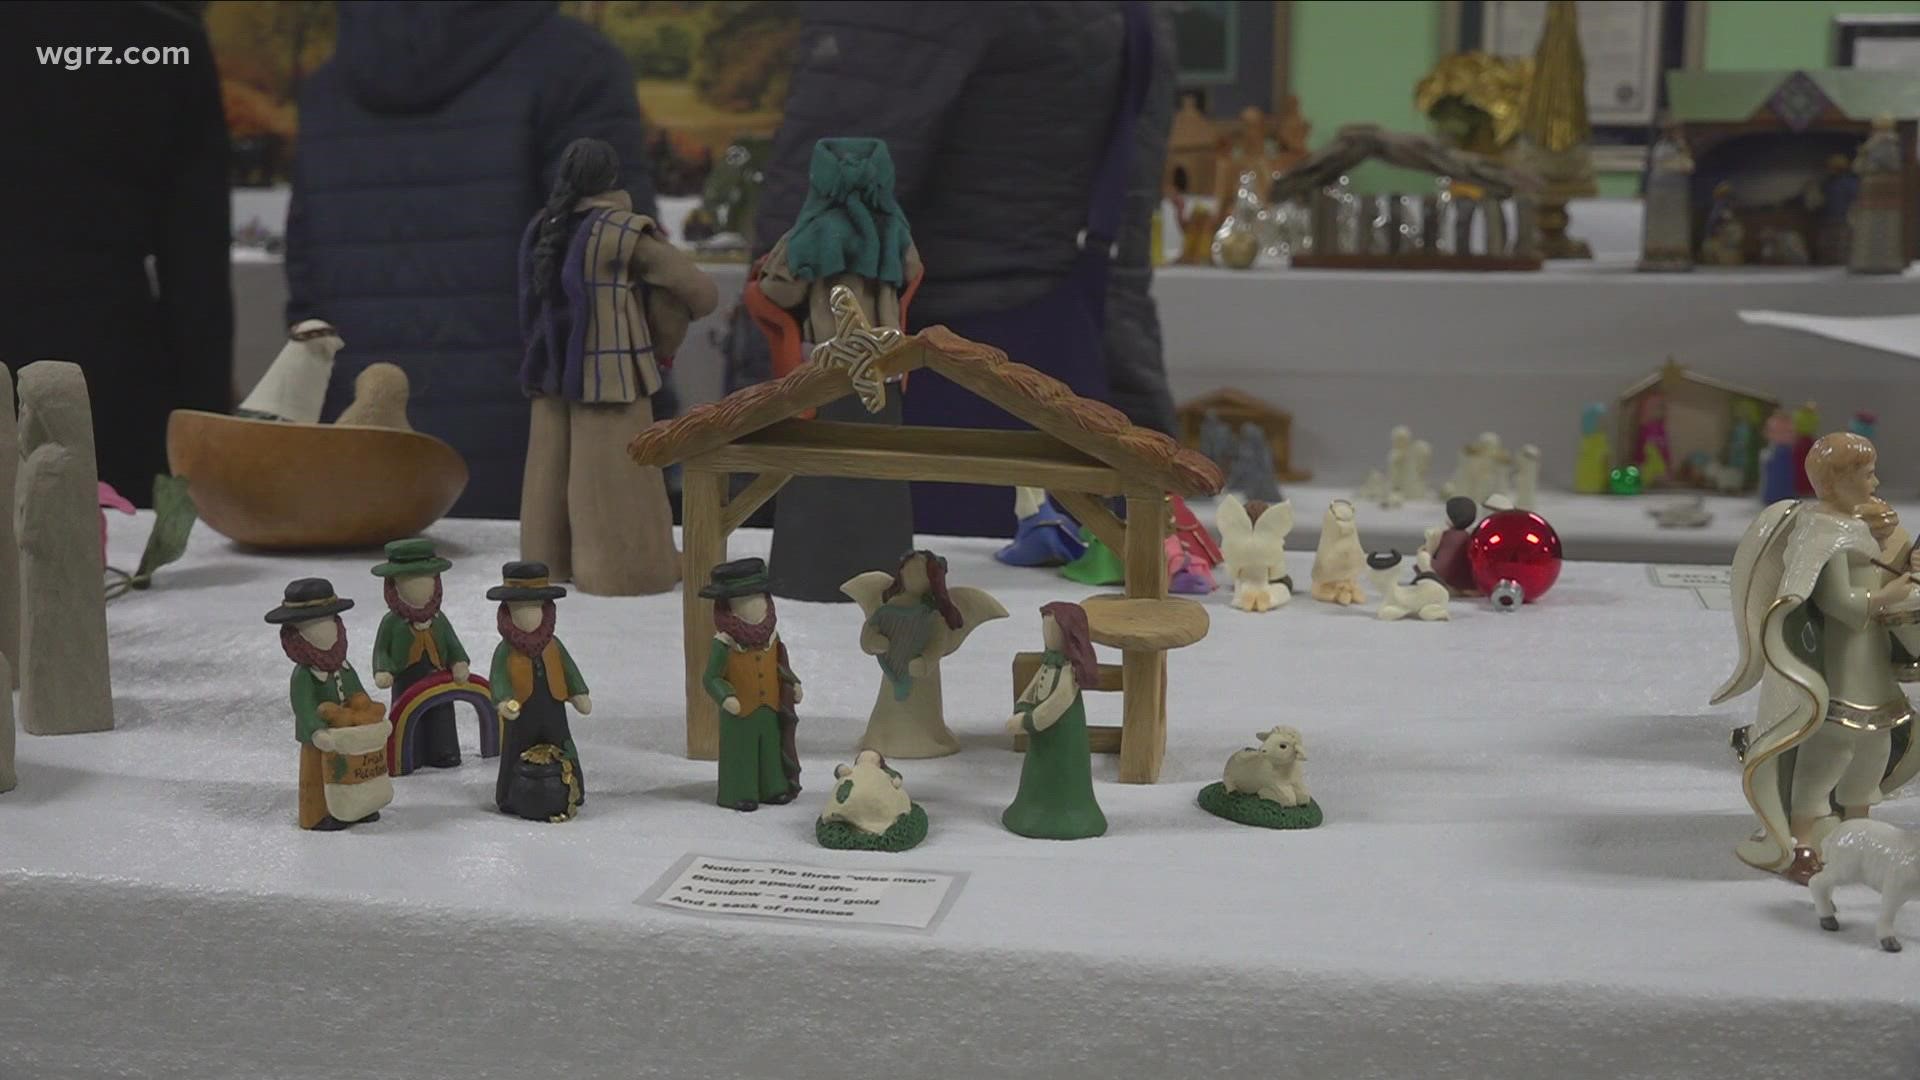 More than 300 Nativities on display in Lewiston